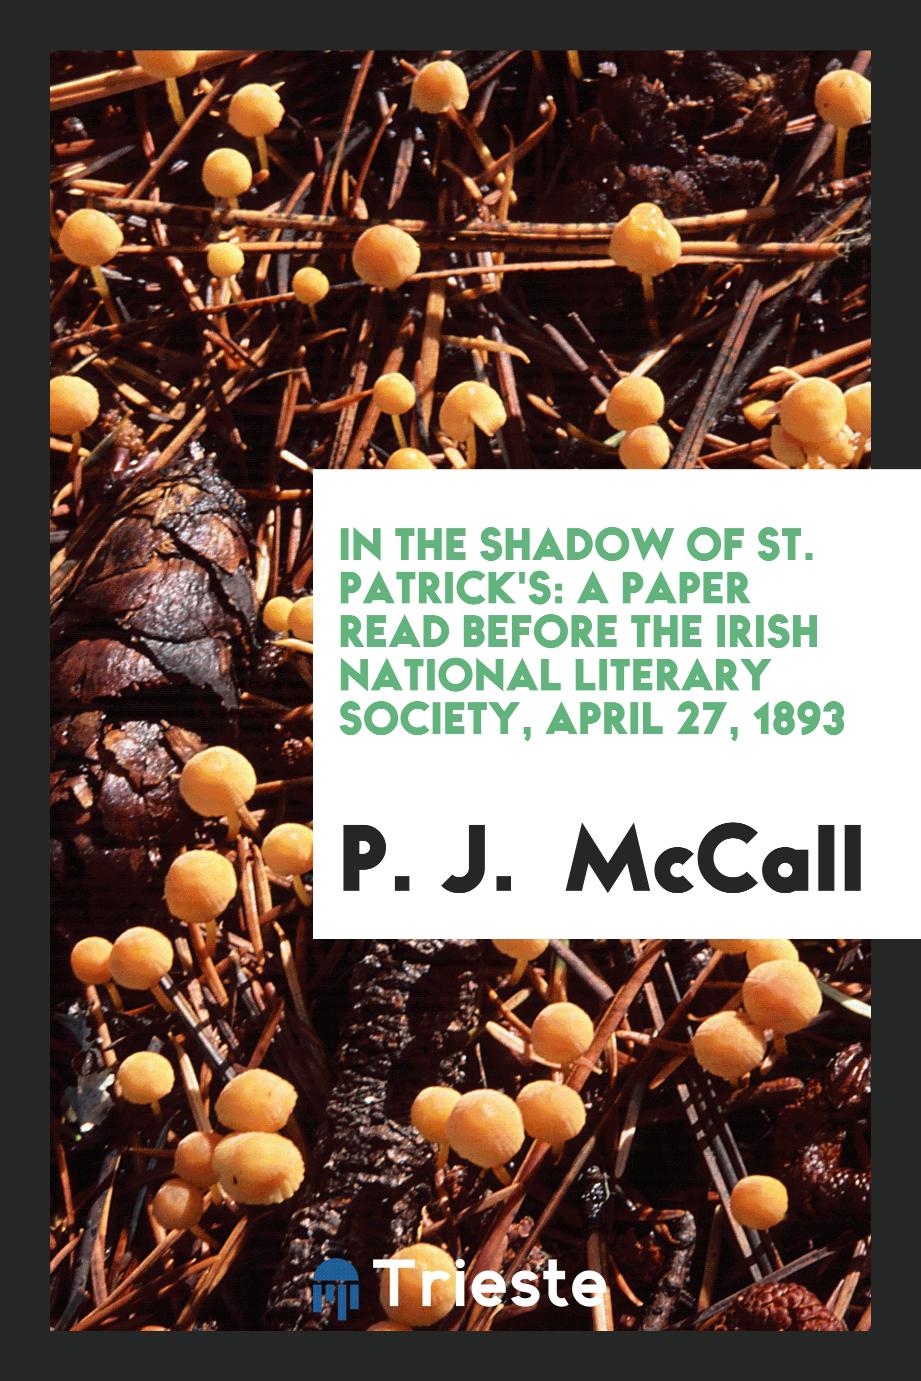 In the Shadow of St. Patrick's: A Paper Read Before the Irish National Literary Society, April 27, 1893